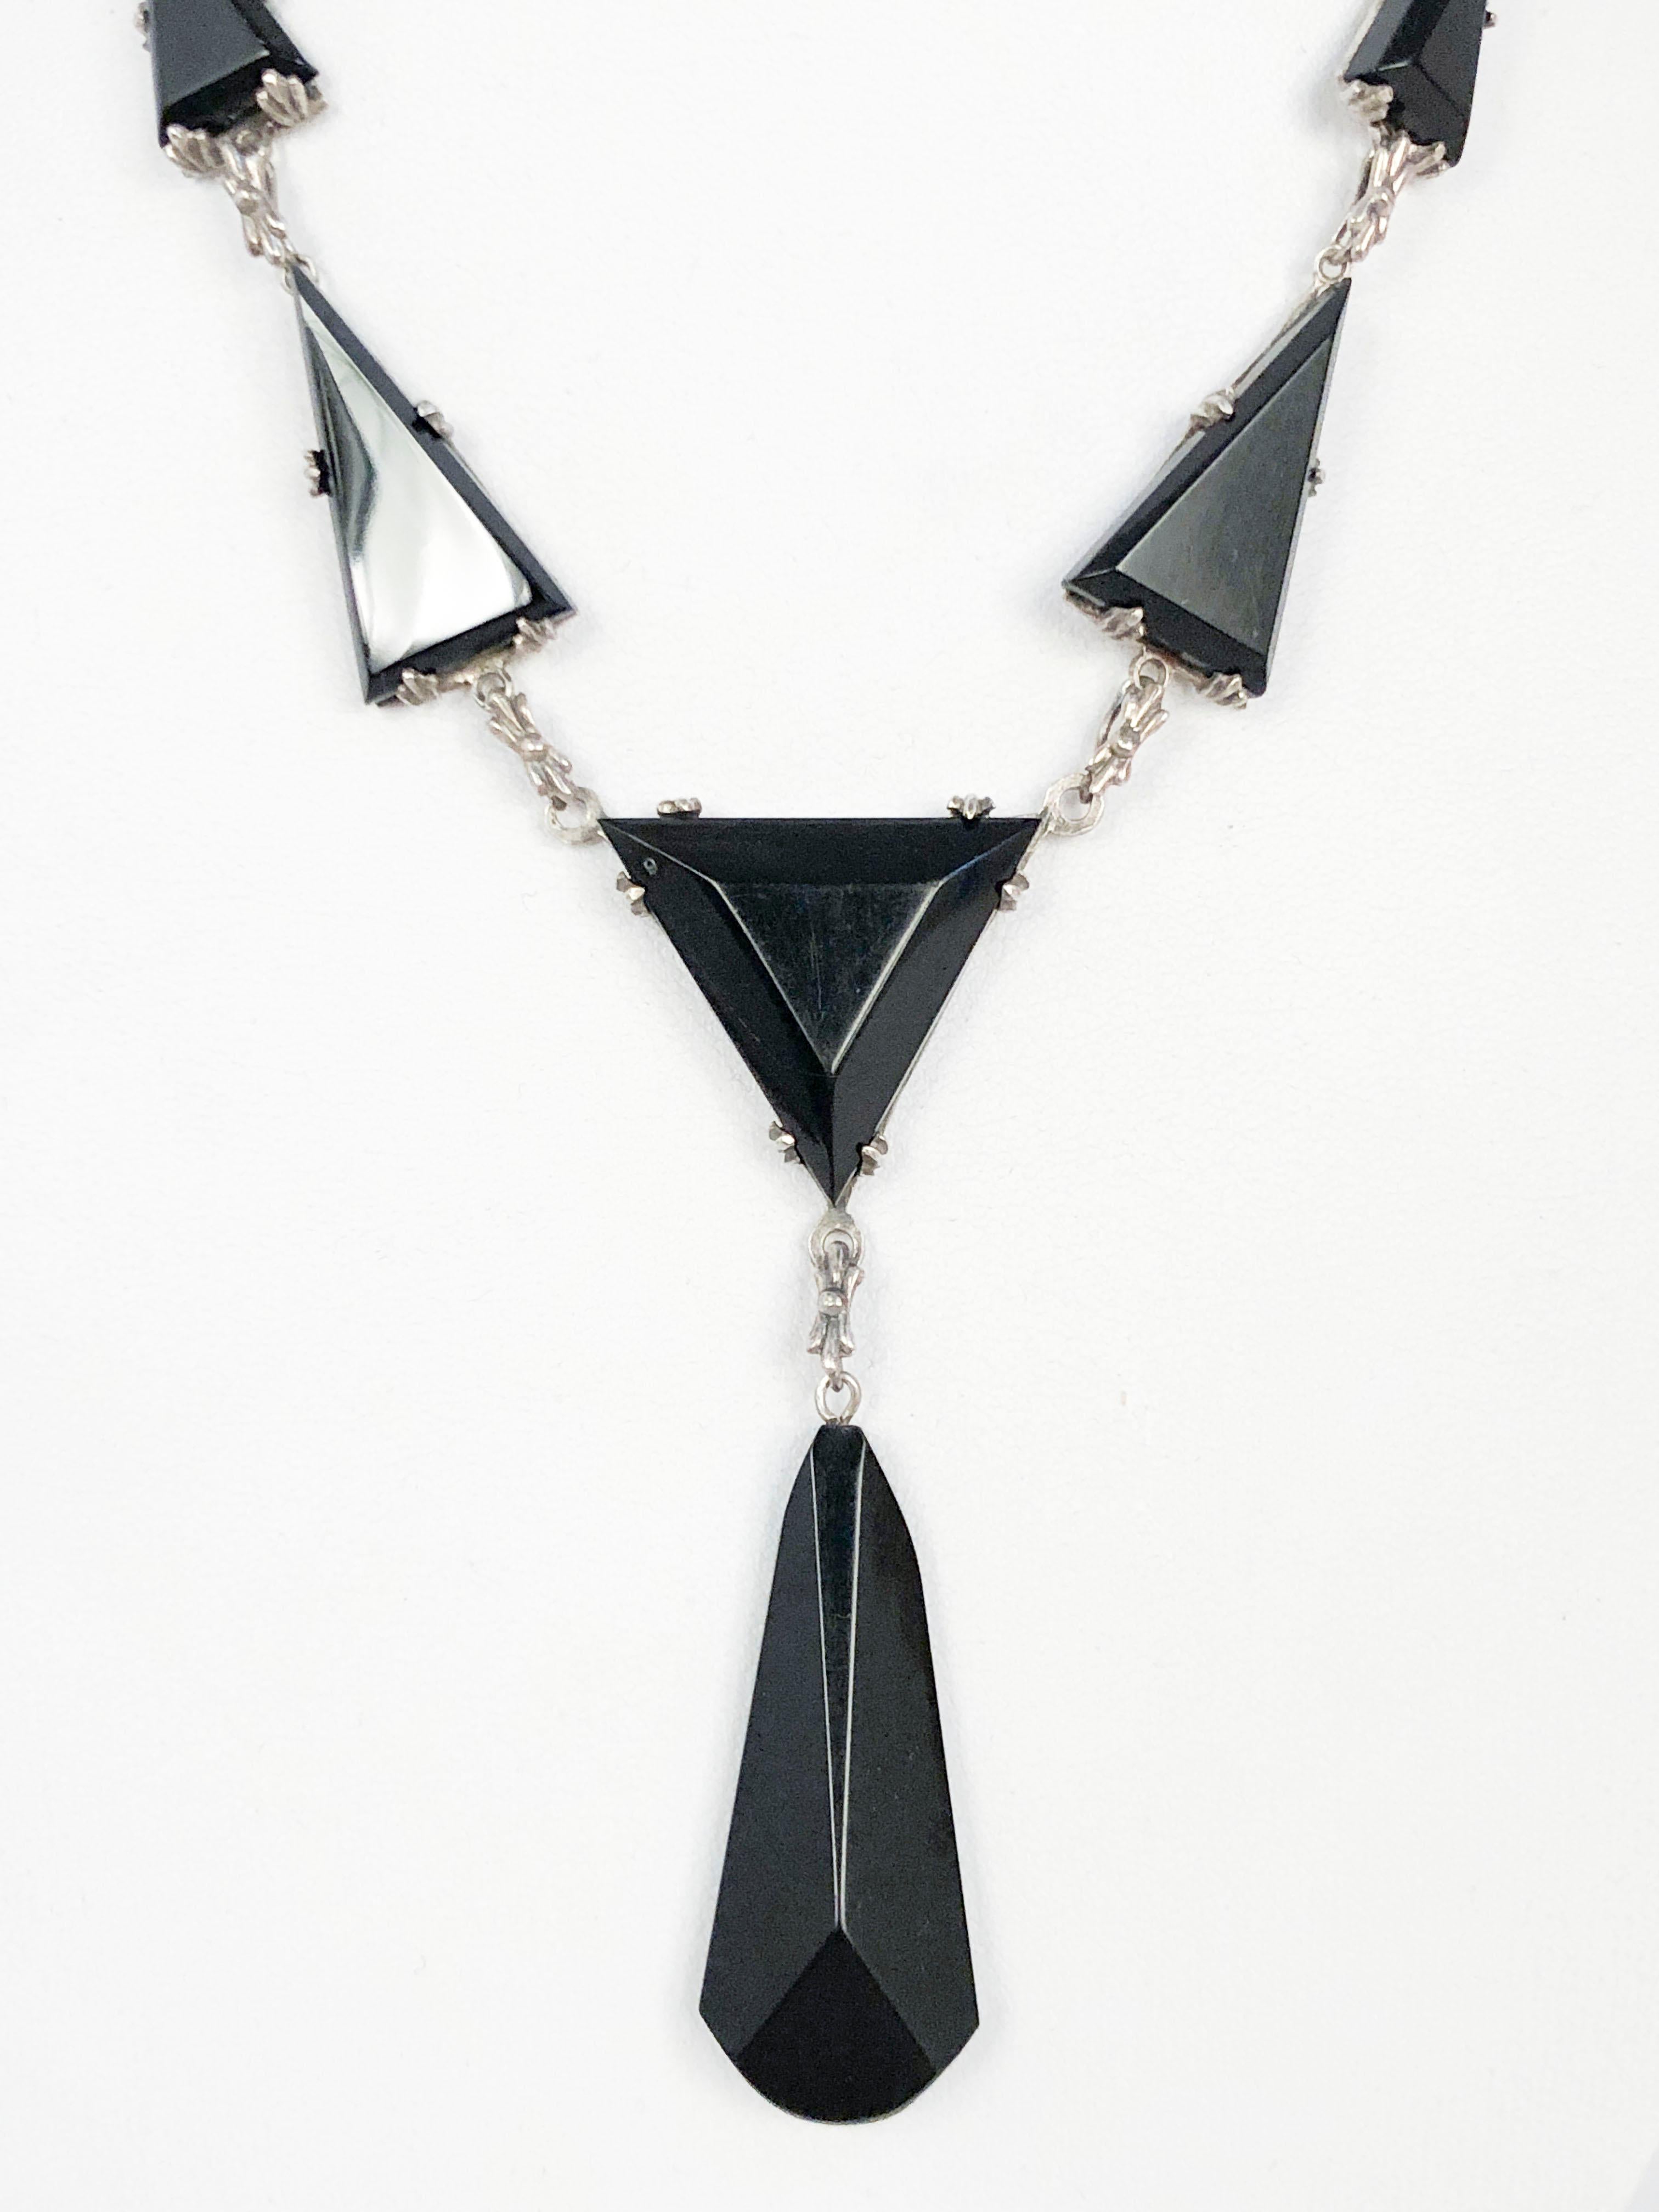 1930s Art Deco Silver necklace featuring geometric shaped onyx and black bakelite, teardrop hanging accent and filigree closure. 